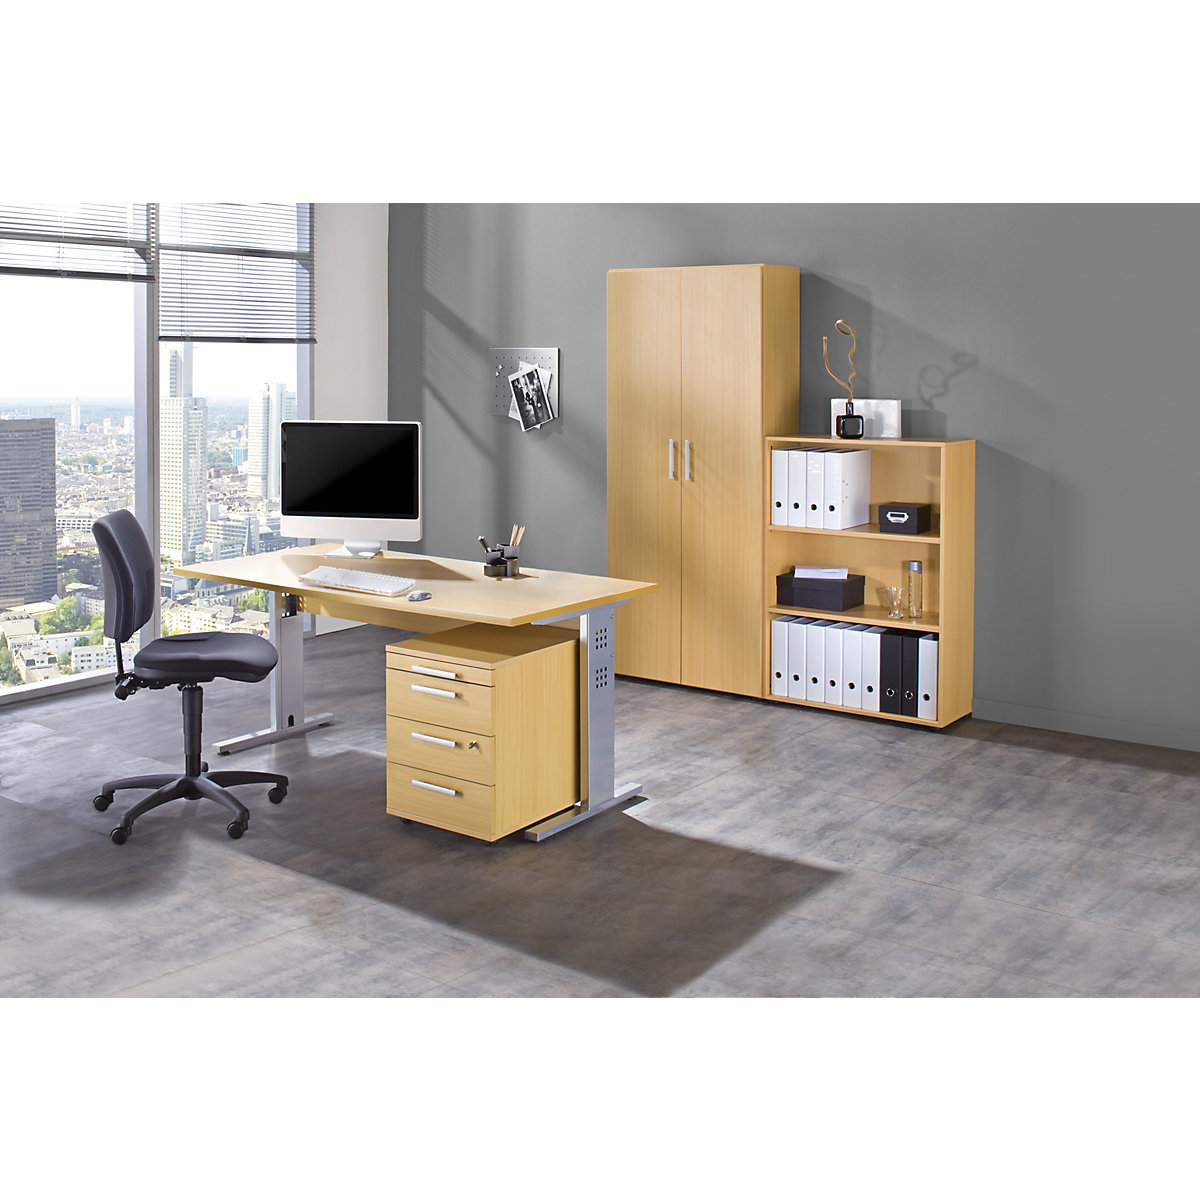 Office package MULTI, 1 table, 1 shelf unit, 1 mobile pedestal, 1 filing cupboard, with black office swivel chair, beech finish-3